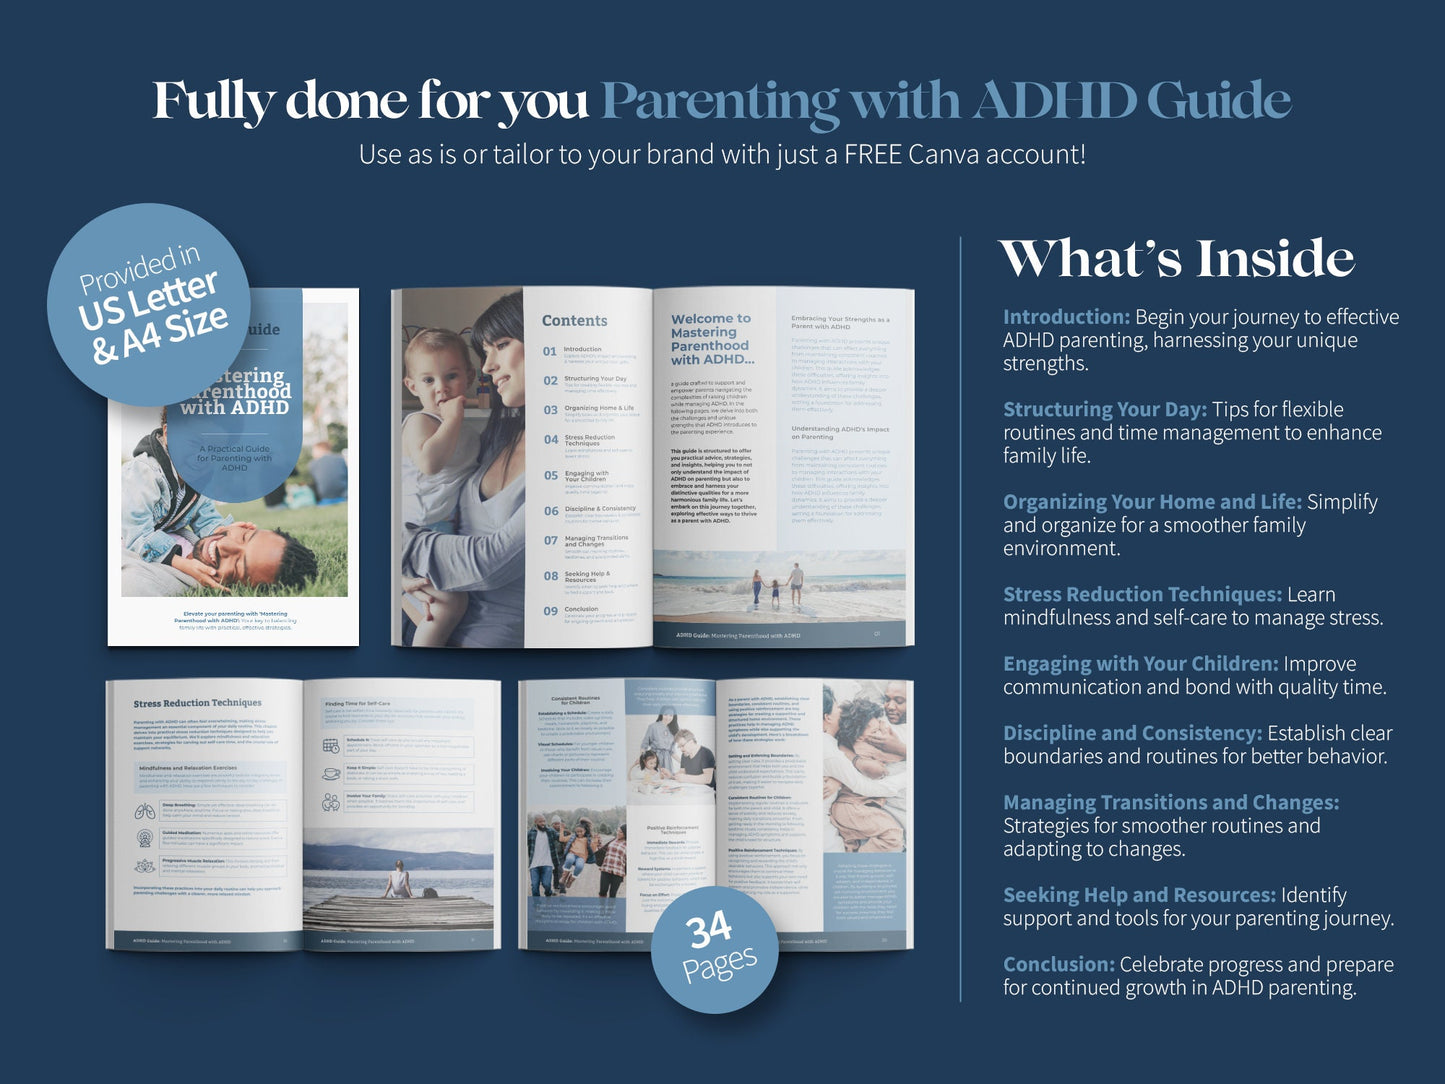 ADHD Parenting with ADHD Guide